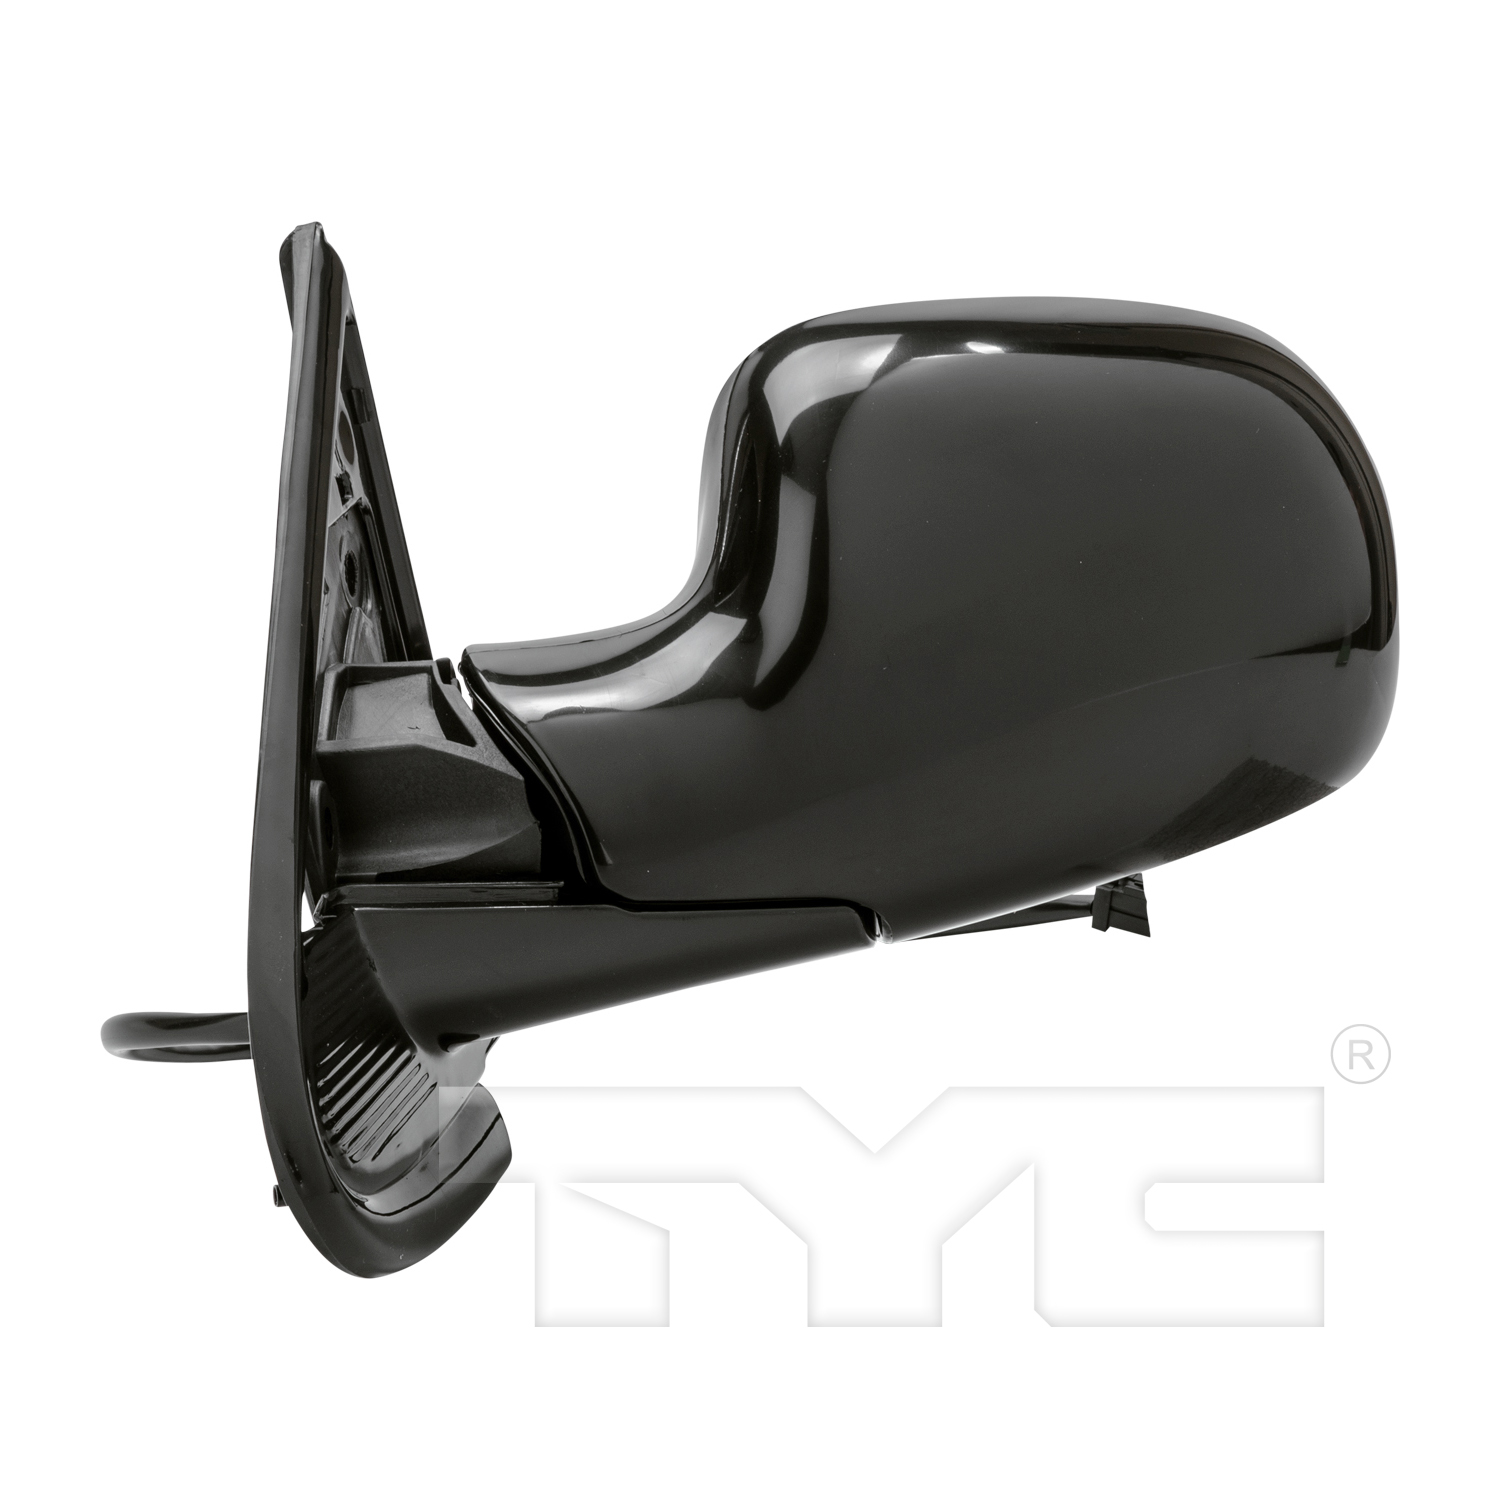 Aftermarket MIRRORS for CHRYSLER - TOWN & COUNTRY, TOWN & COUNTRY,01-03,LT Mirror outside rear view